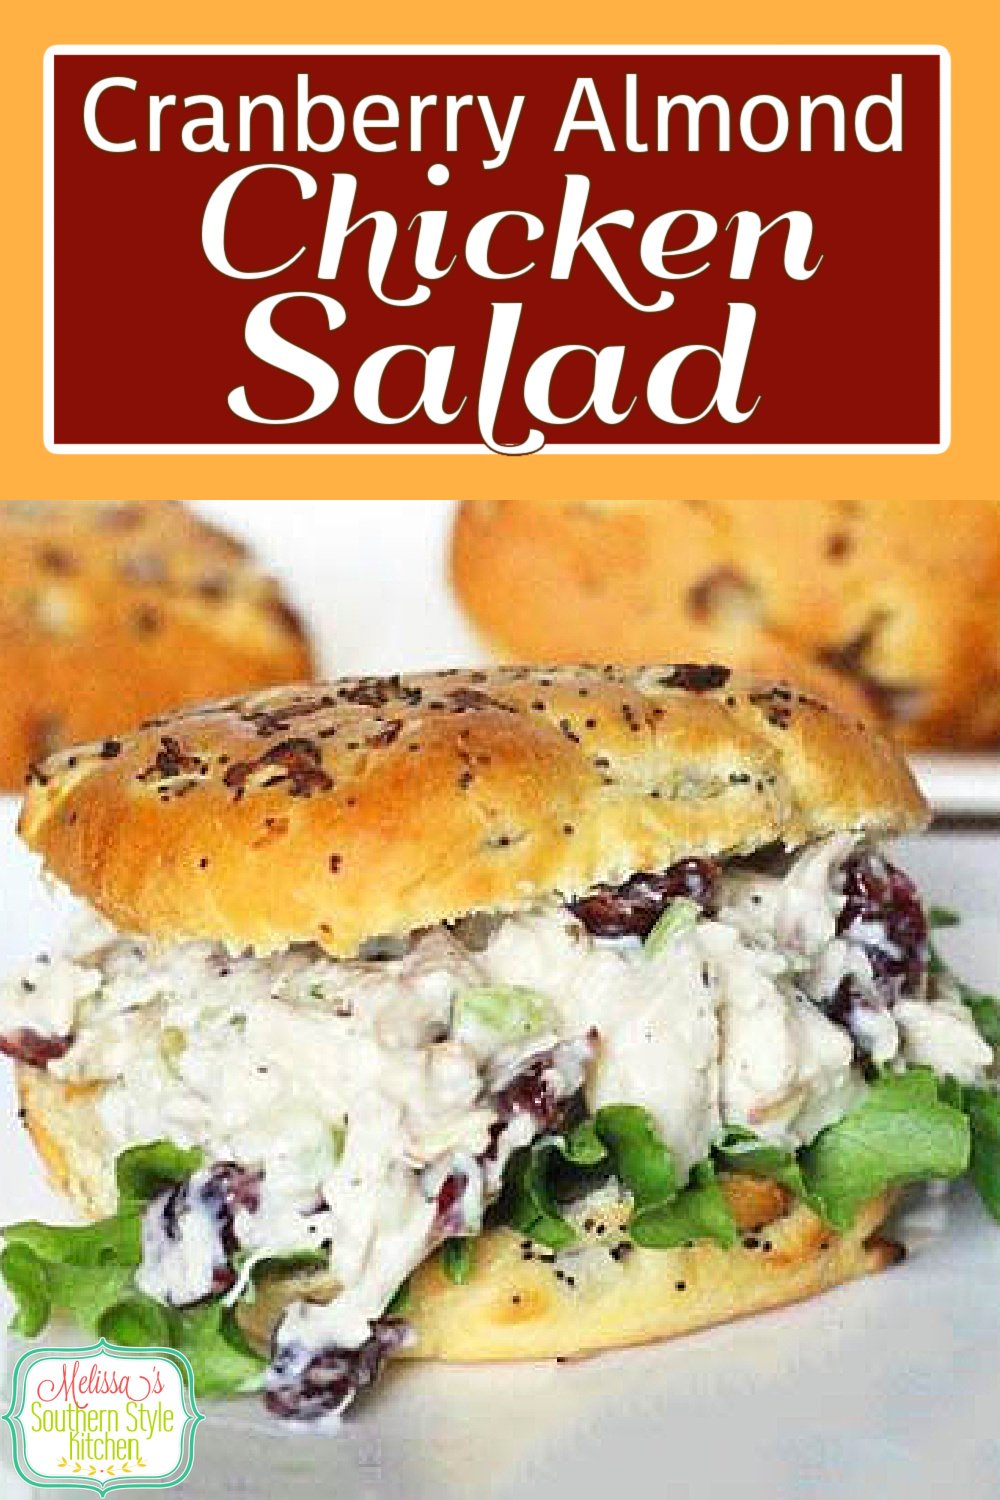 Stuff croissants, lettuce or rolls with a heaping helping of this Cranberry Almond Chicken Salad #chickensalad #chickenbreastrecipes #chicken #cranberrychickensalad #easyrecipes #dinner #dinnerideas #southernrecipes #southernfood #food via @melissasssk